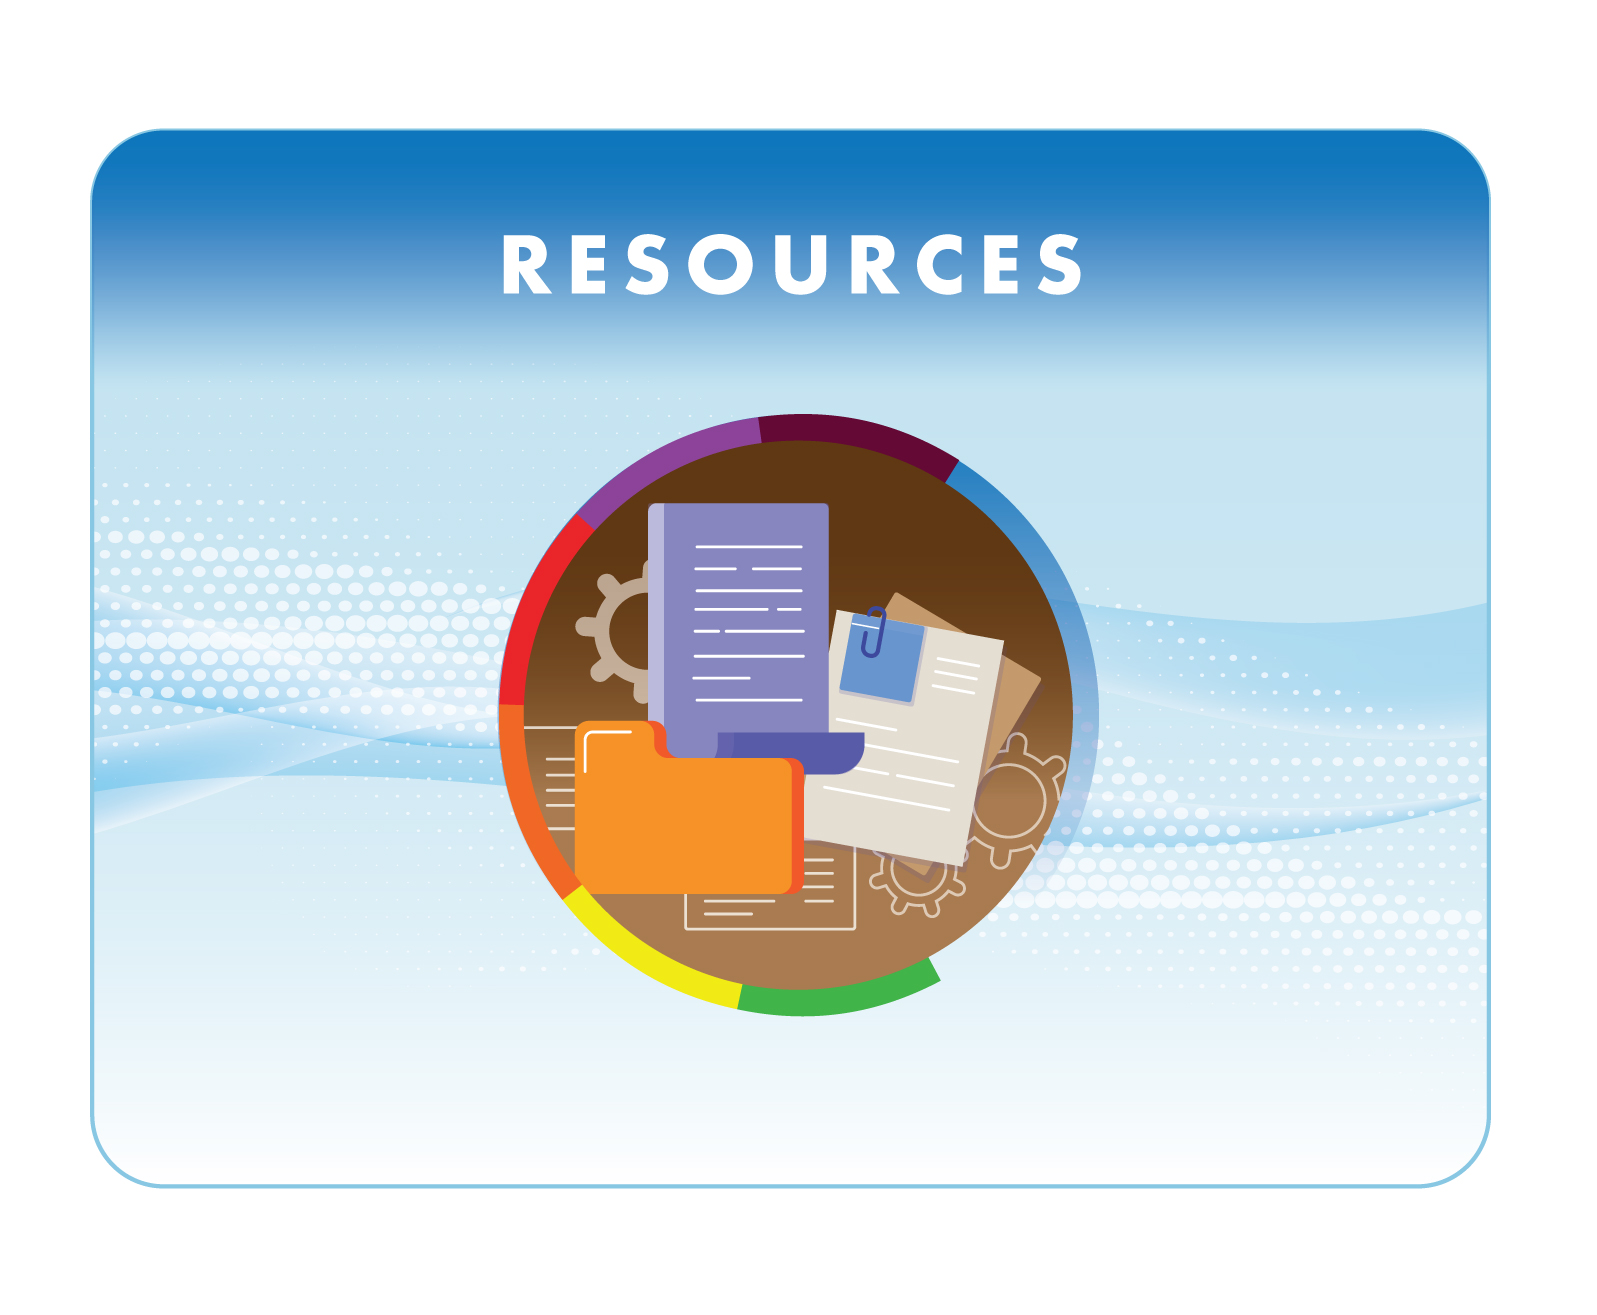 Logo for AQAW 2024 Resources. The page "Resources” is depicted with a stack of papers